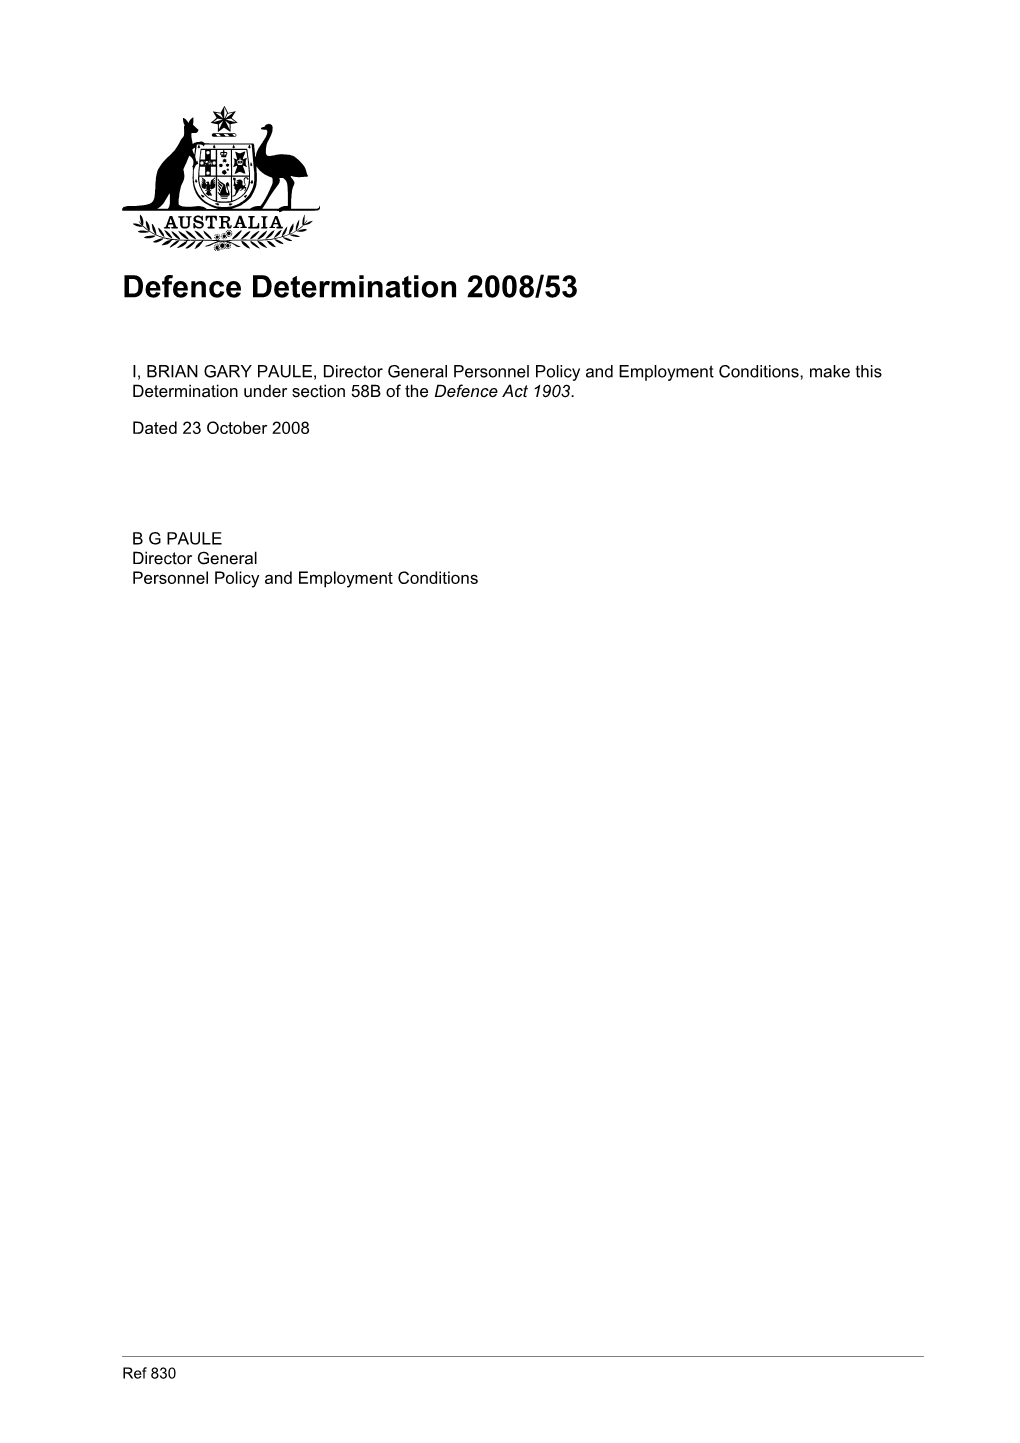 Annex 17.9.A (Deployment Allowance Eligible Areas and Operations), Table Item 12